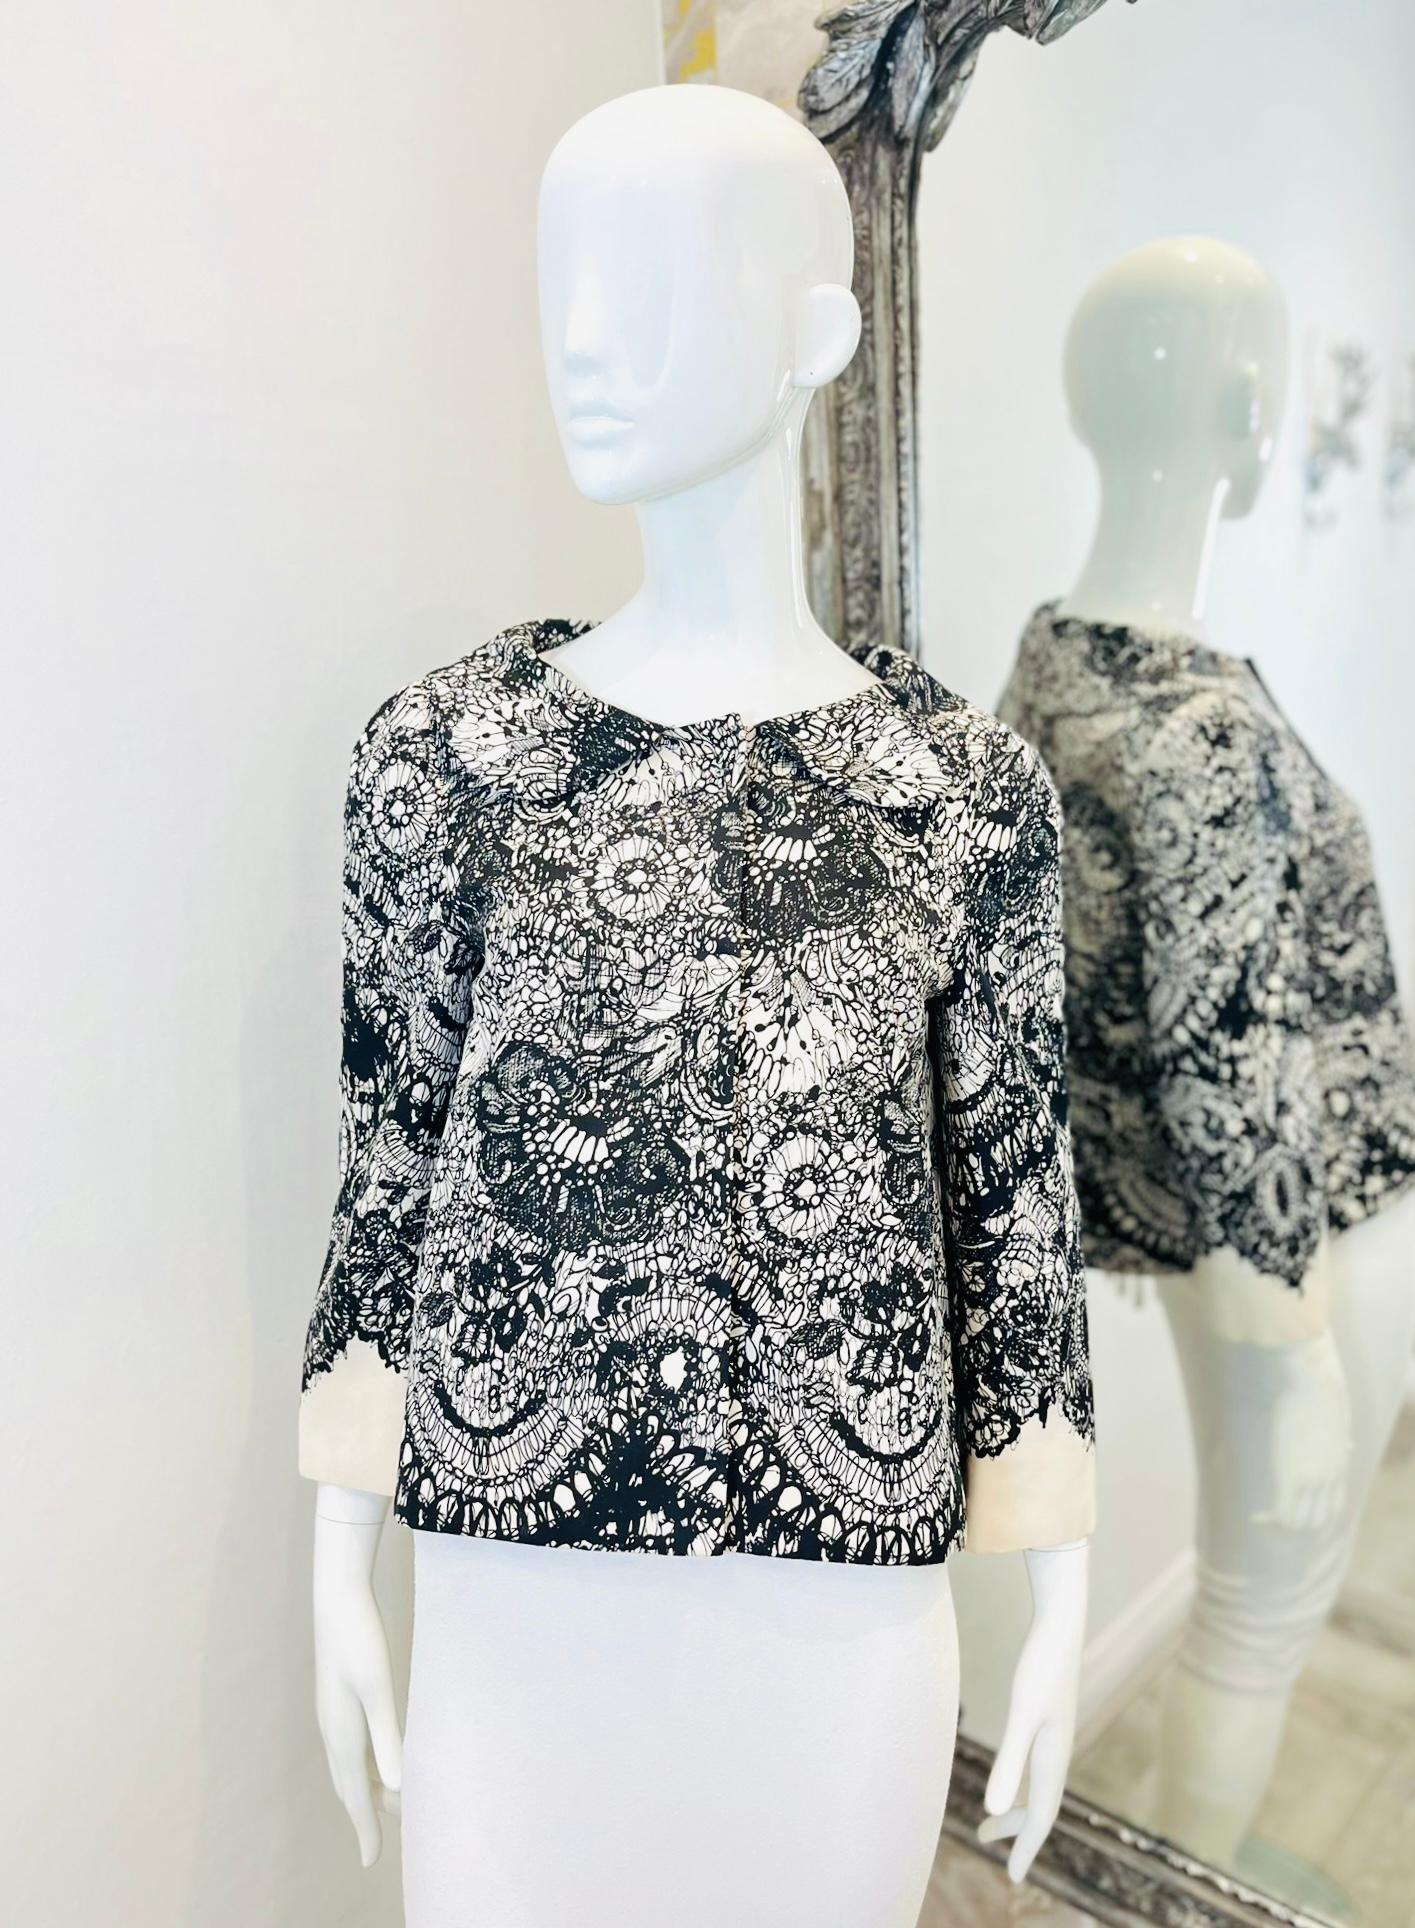 Prada Lace Print Silk Jacket

Black and white jacket designed with floral lace prints throughout.

Featuring three-quarter sleeves with white cuffs and peter pan collar.

Styled with concealed front fastening and boxy silhouette.

Size –